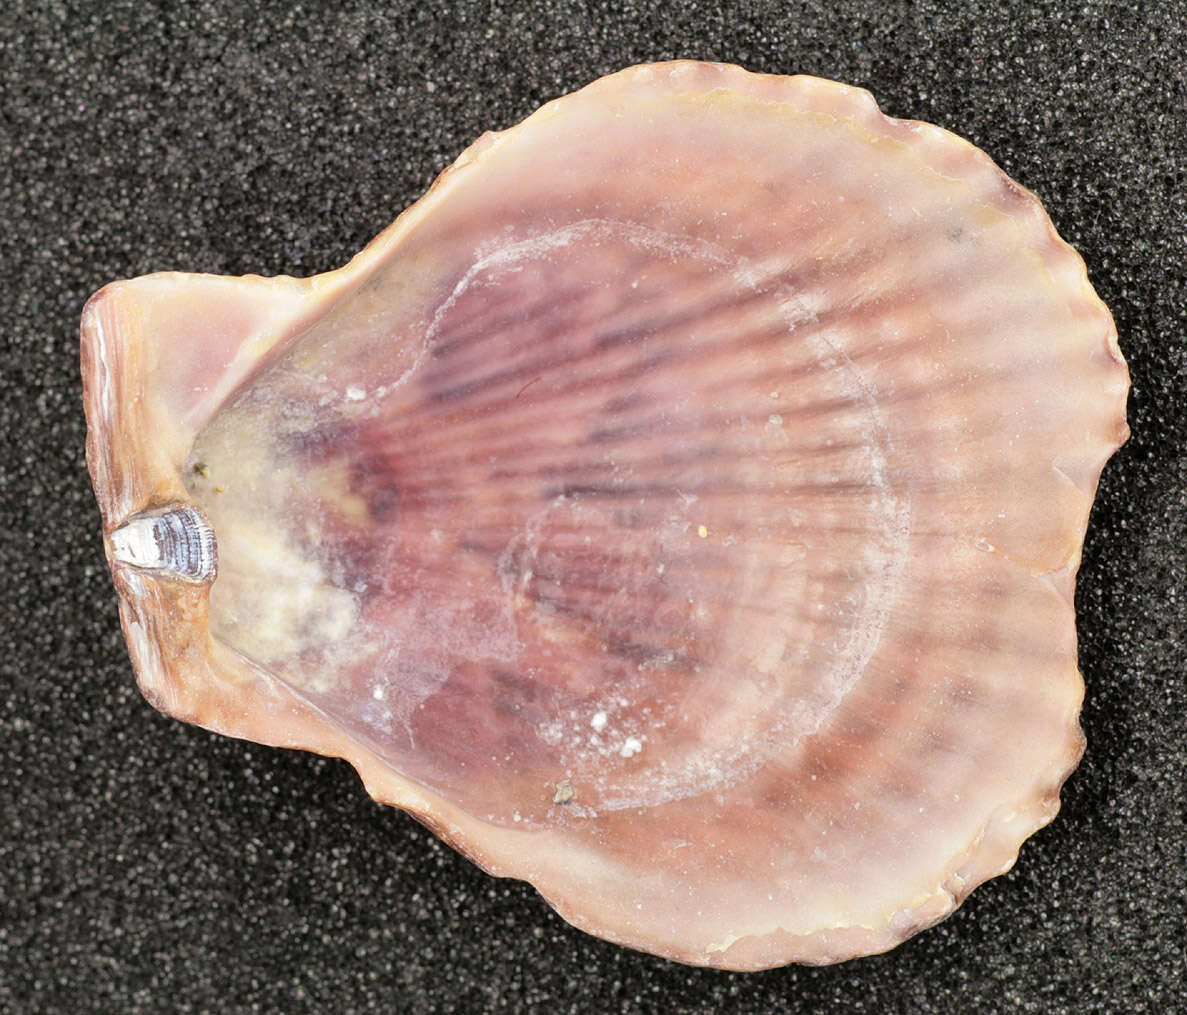 Image of variegated scallop